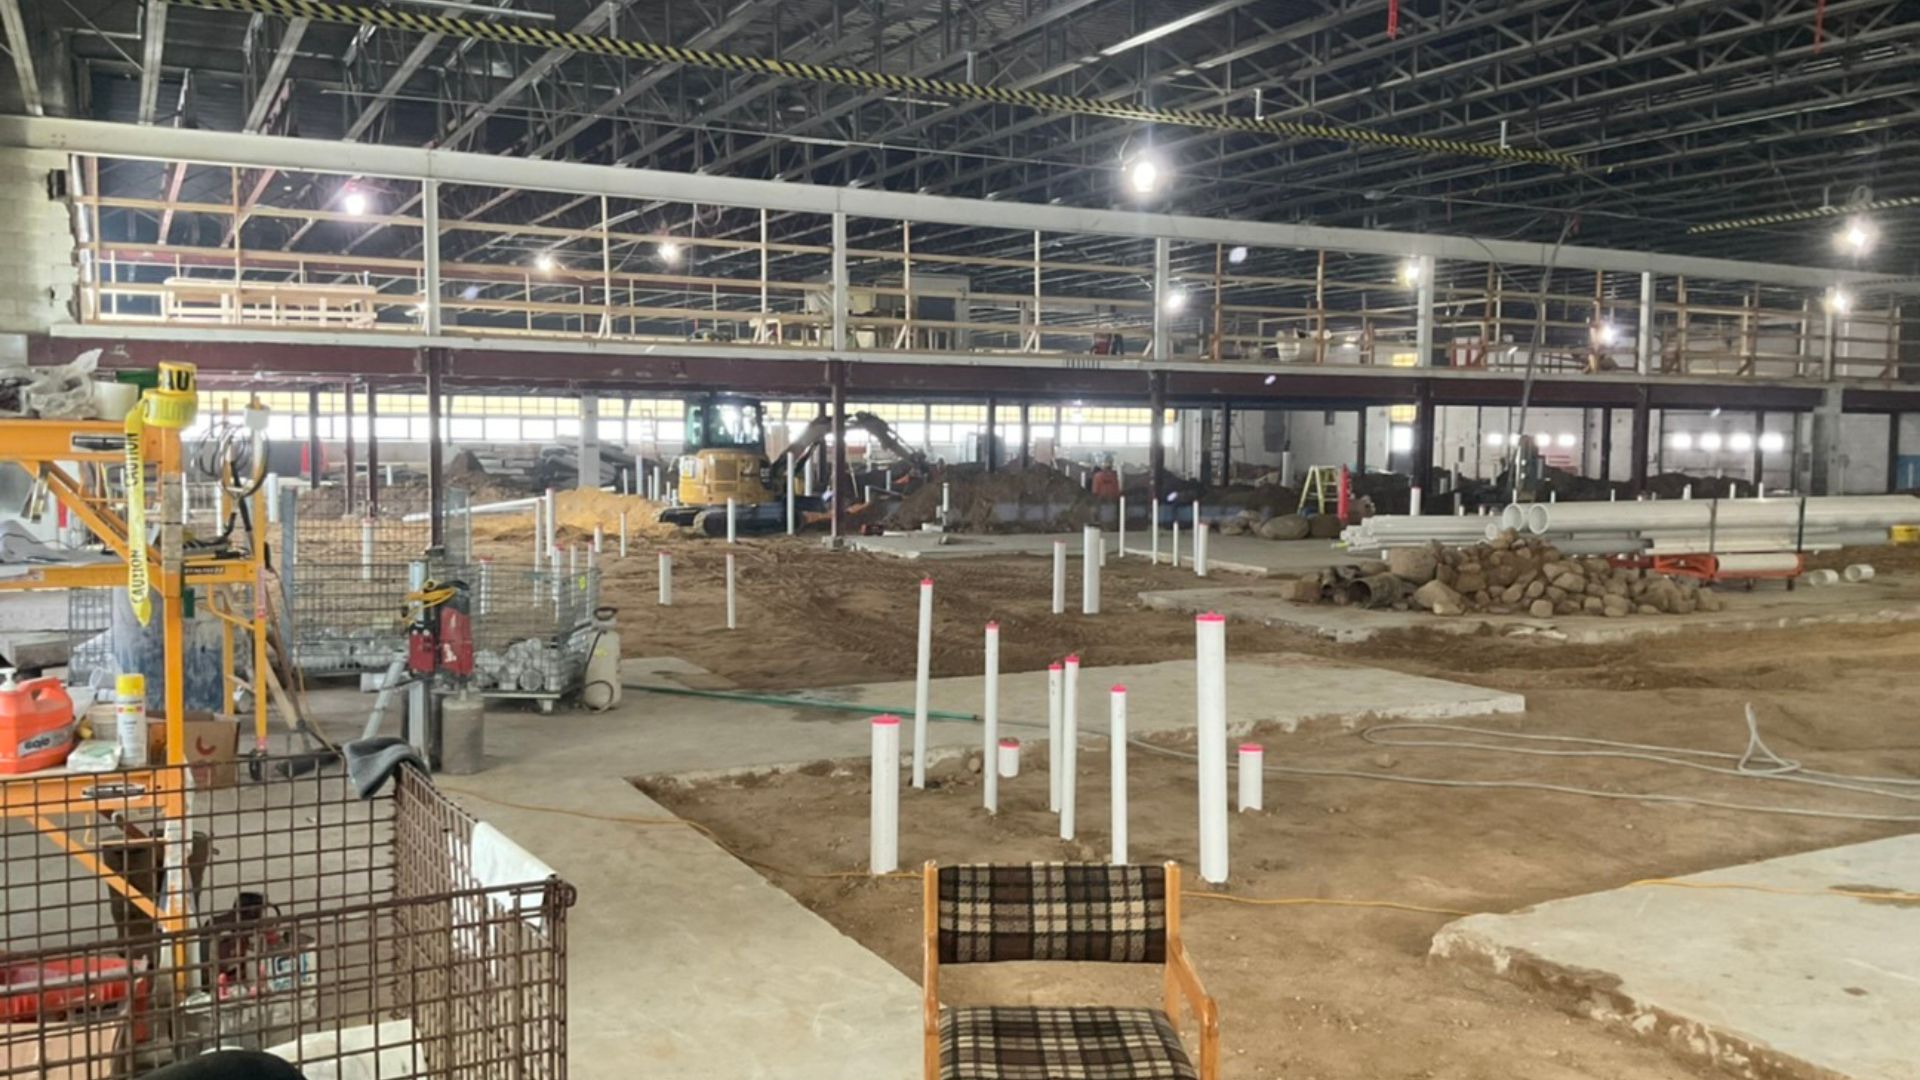 Construction moving on schedule for new Madison Public Market